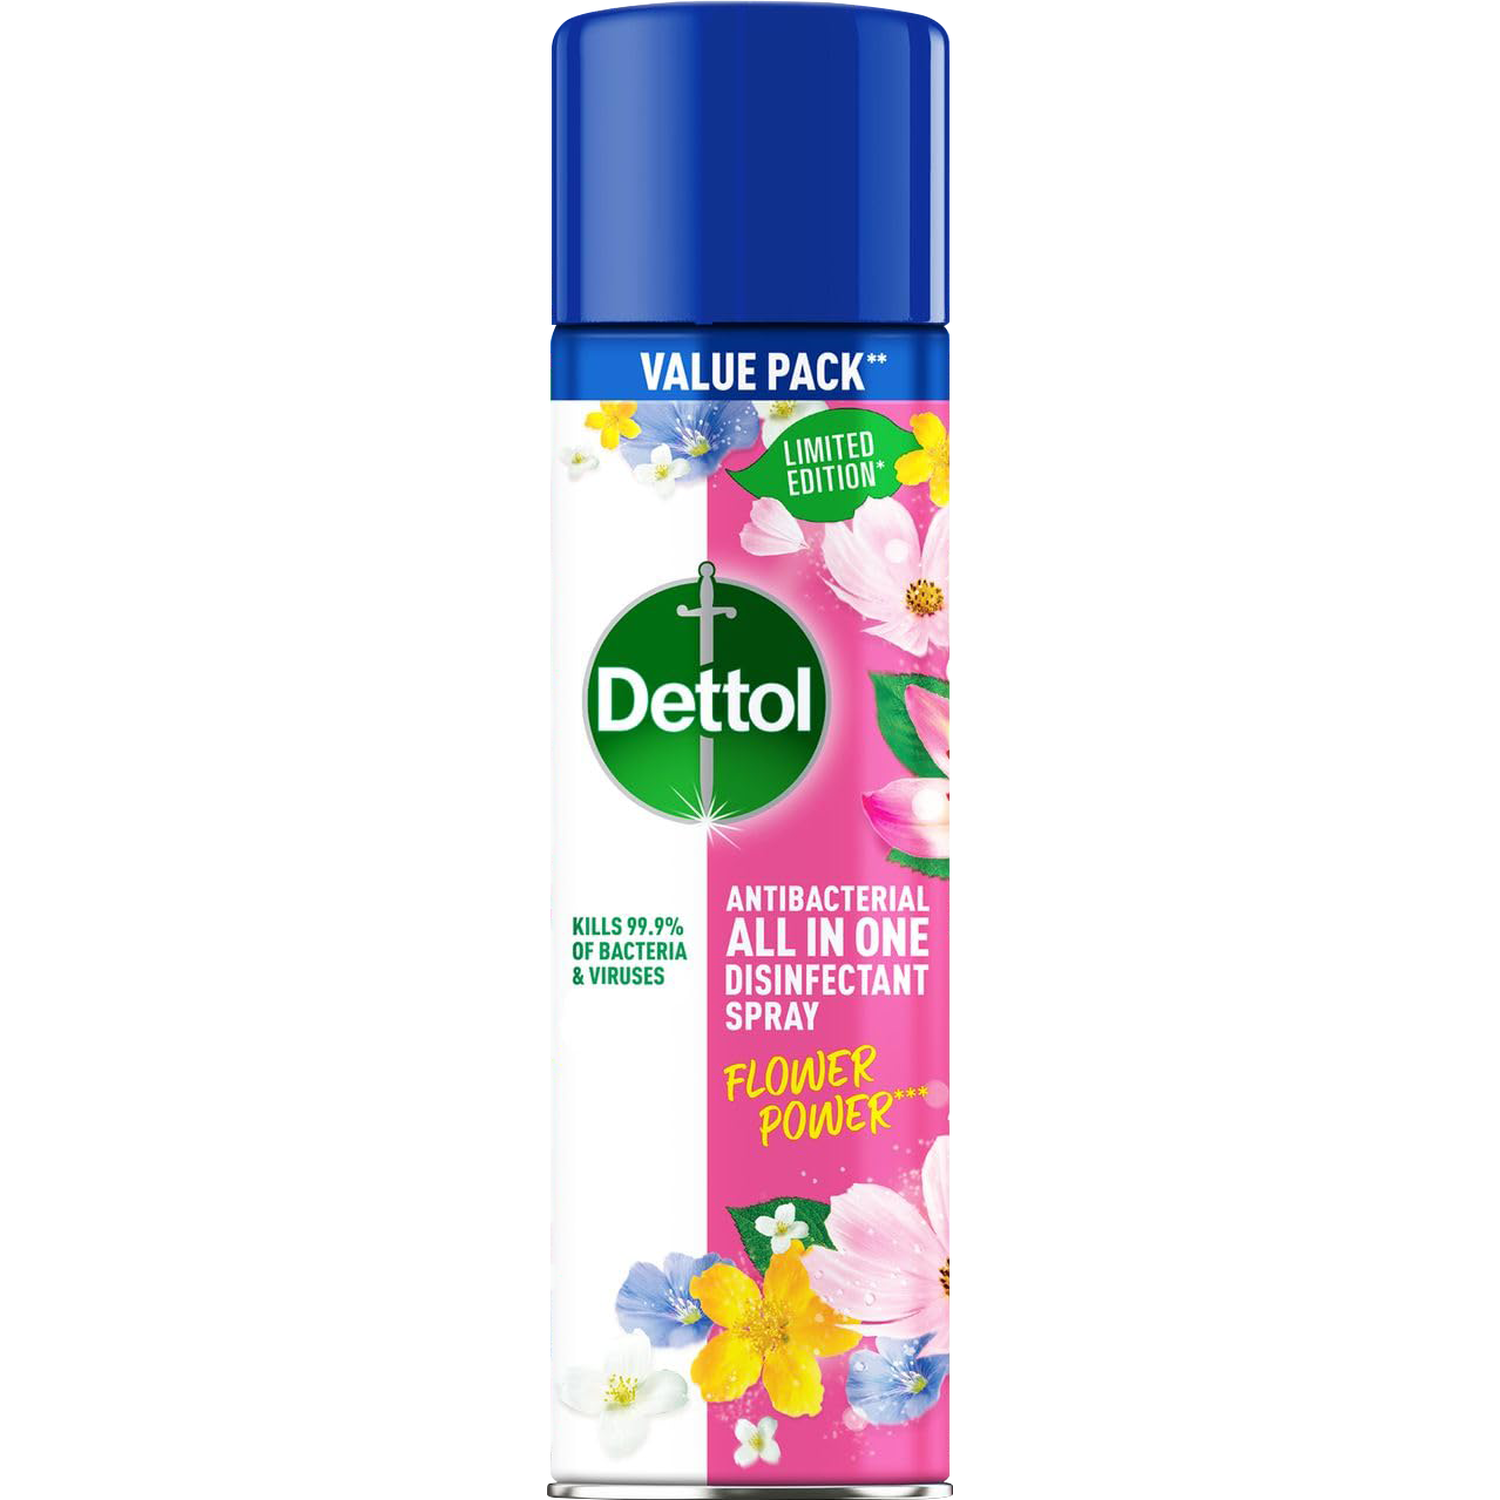 Dettol All In One Antibacterial Disinfectant Spray 500ml - Flower Power Image